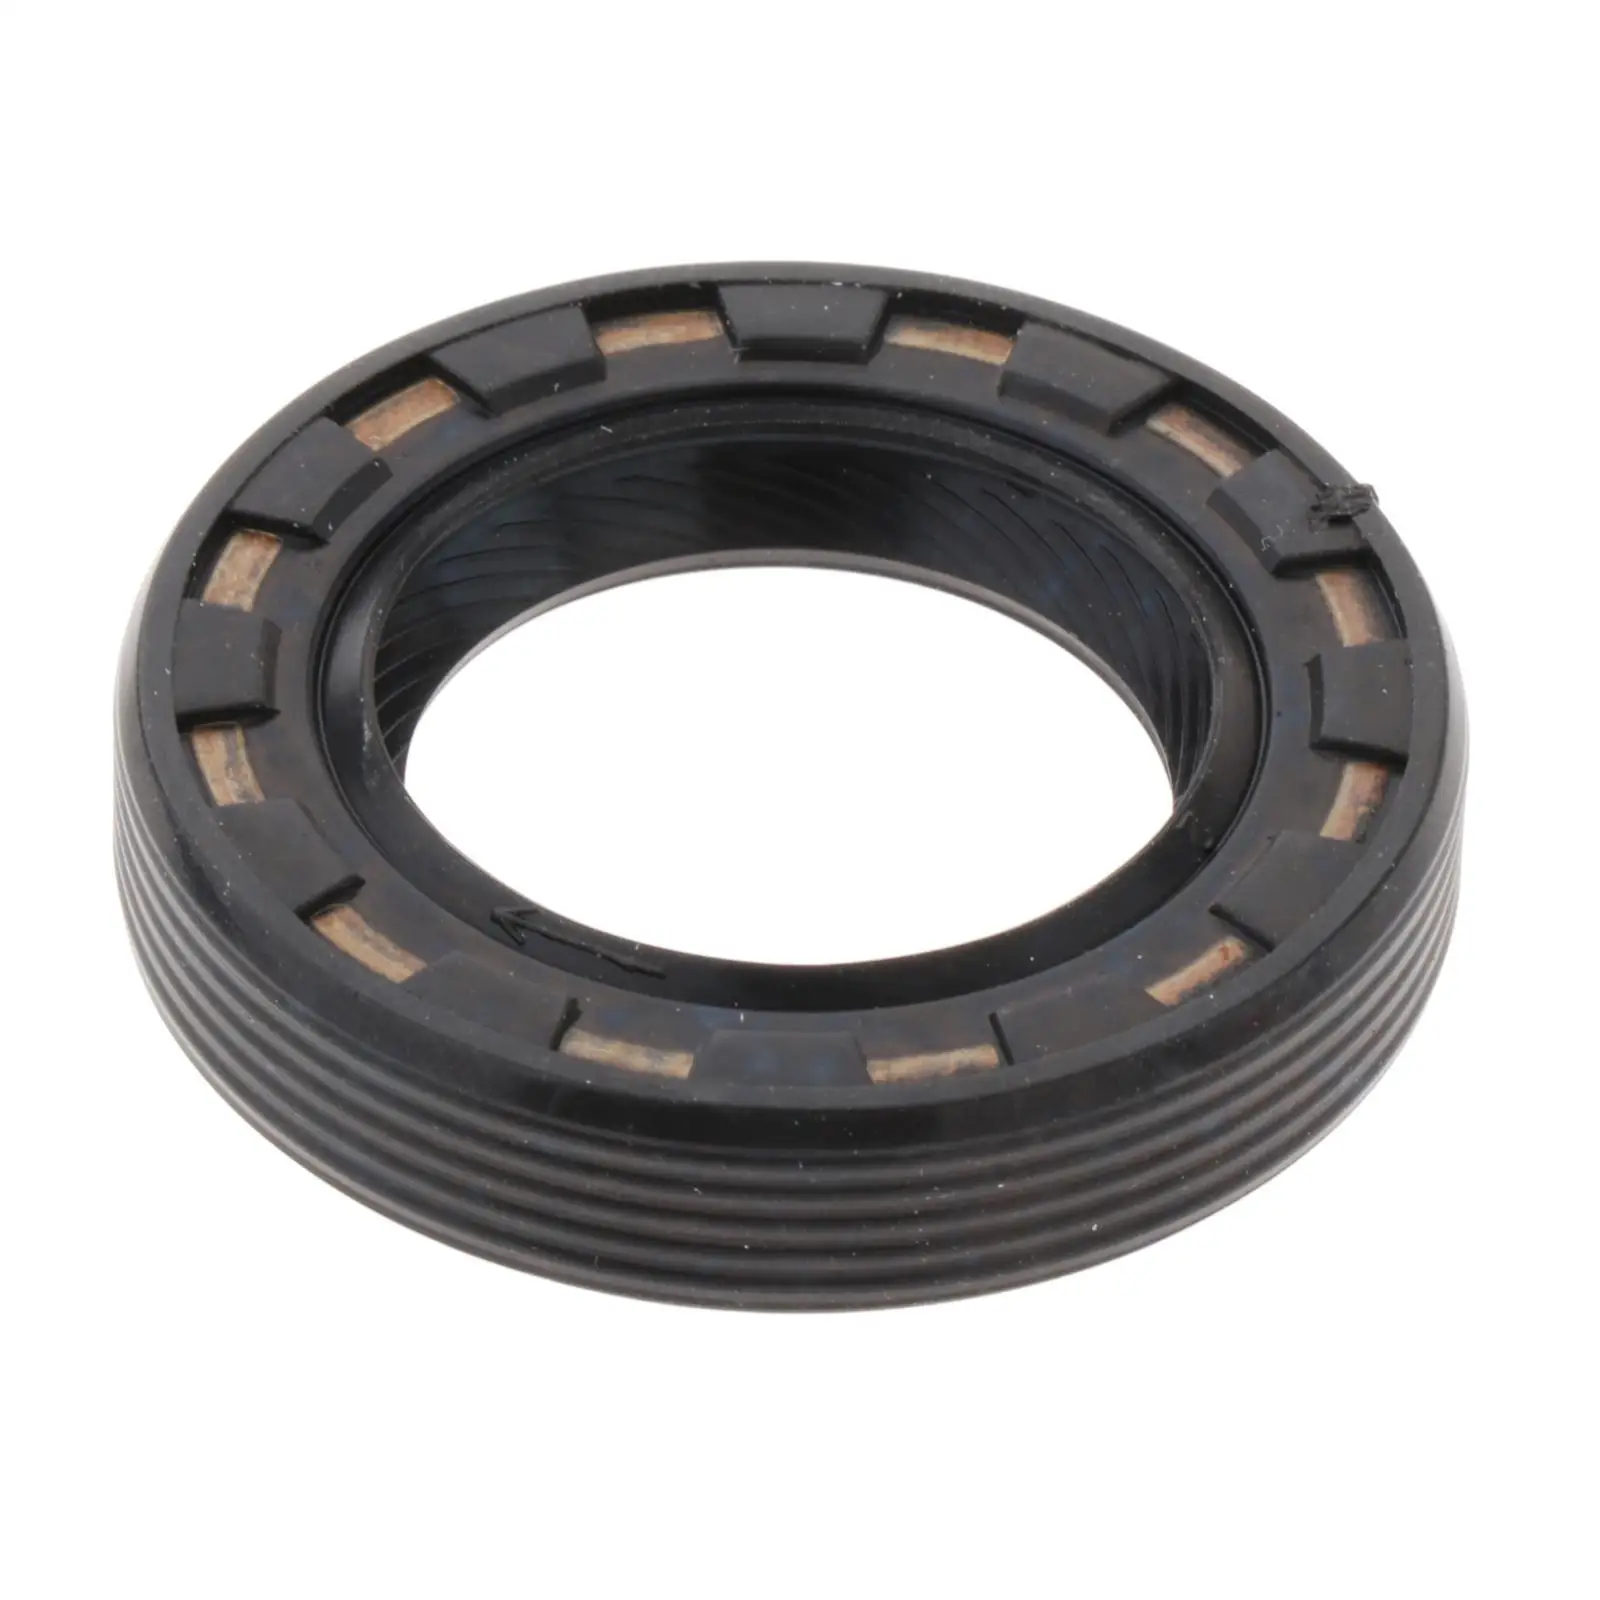 Transmission Front Oil Seal Half Shaft Oil Seal Replacement Bearings Seals 01T/01J/01N A4 A6 A8 Automotive  for 